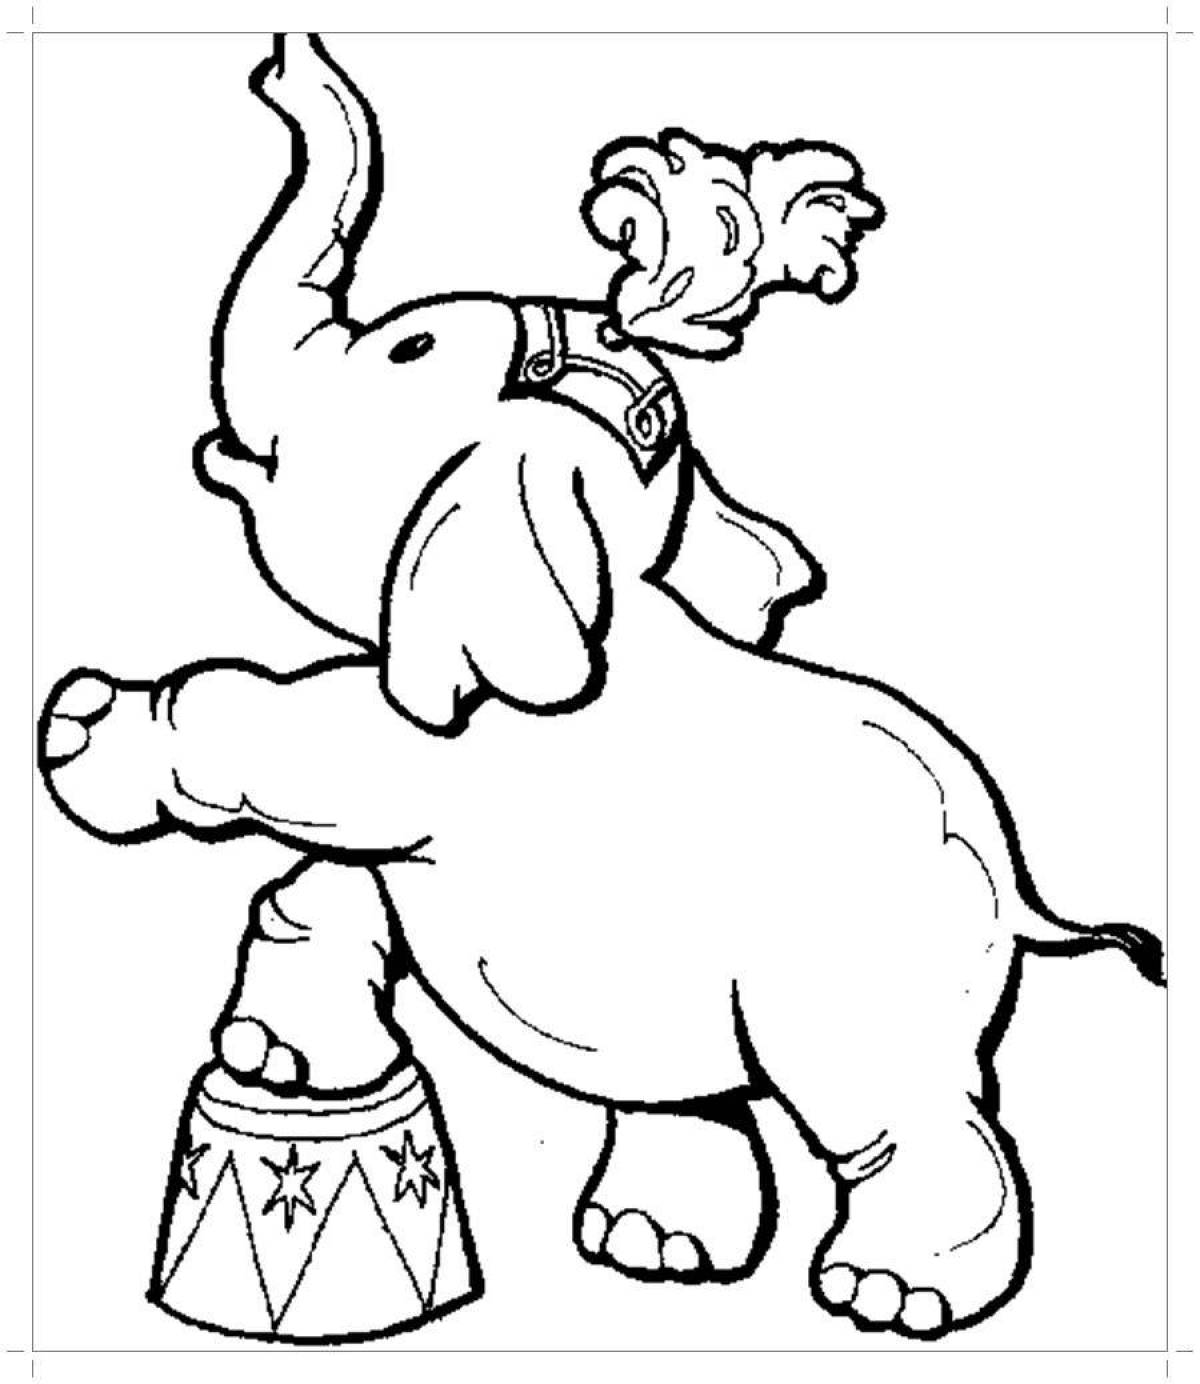 Coloring page spicy circus elephant